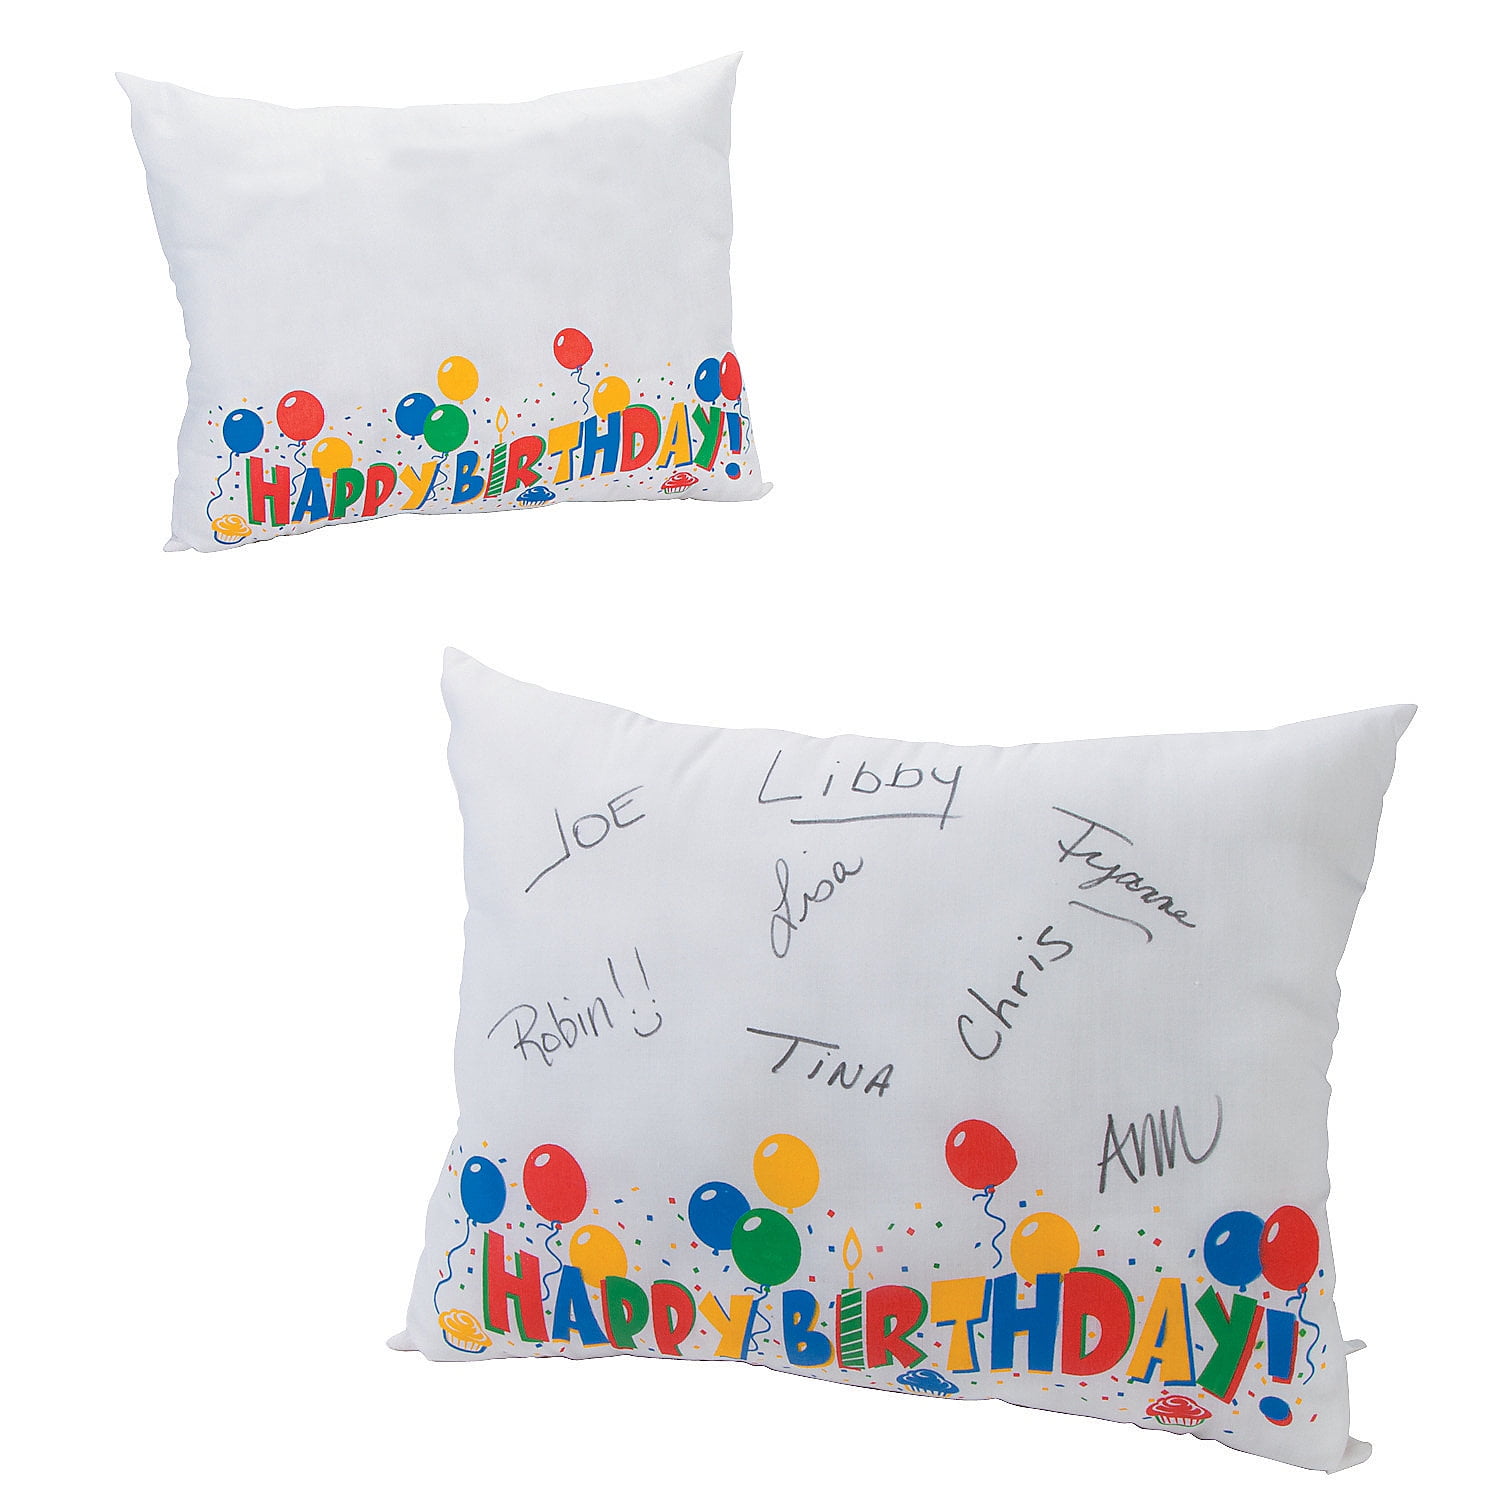 Sweet 16 gift | 16th birthday gift | decorative pillow | sweet 16 pillow | Birthday  pillow